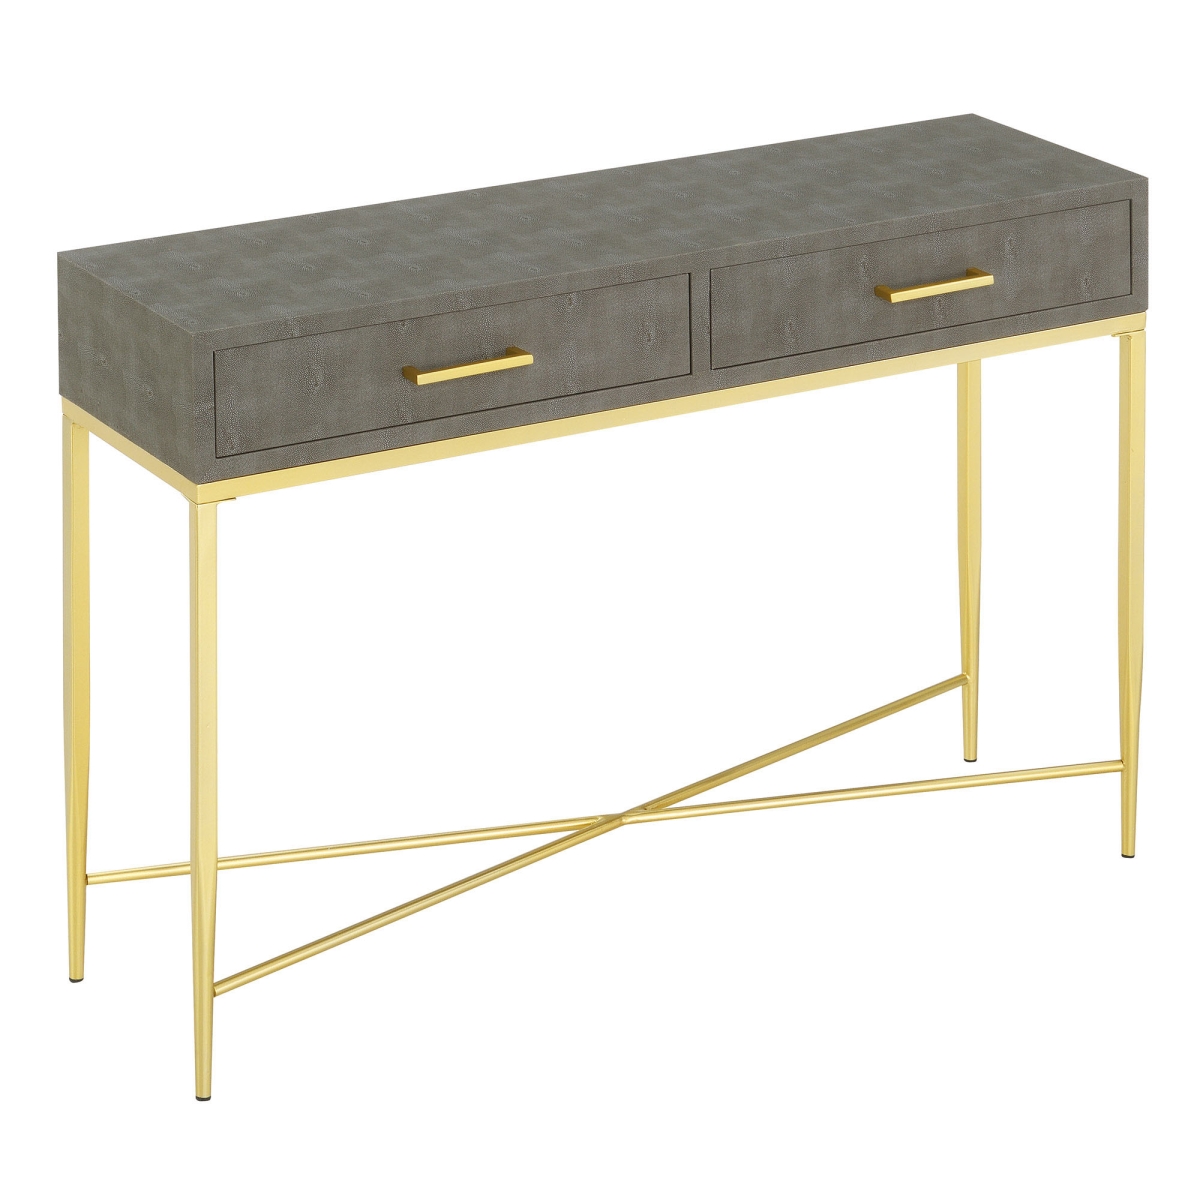 413189gy 42 X 12 X 30 In. Ashley Console Table, Gray & Gold